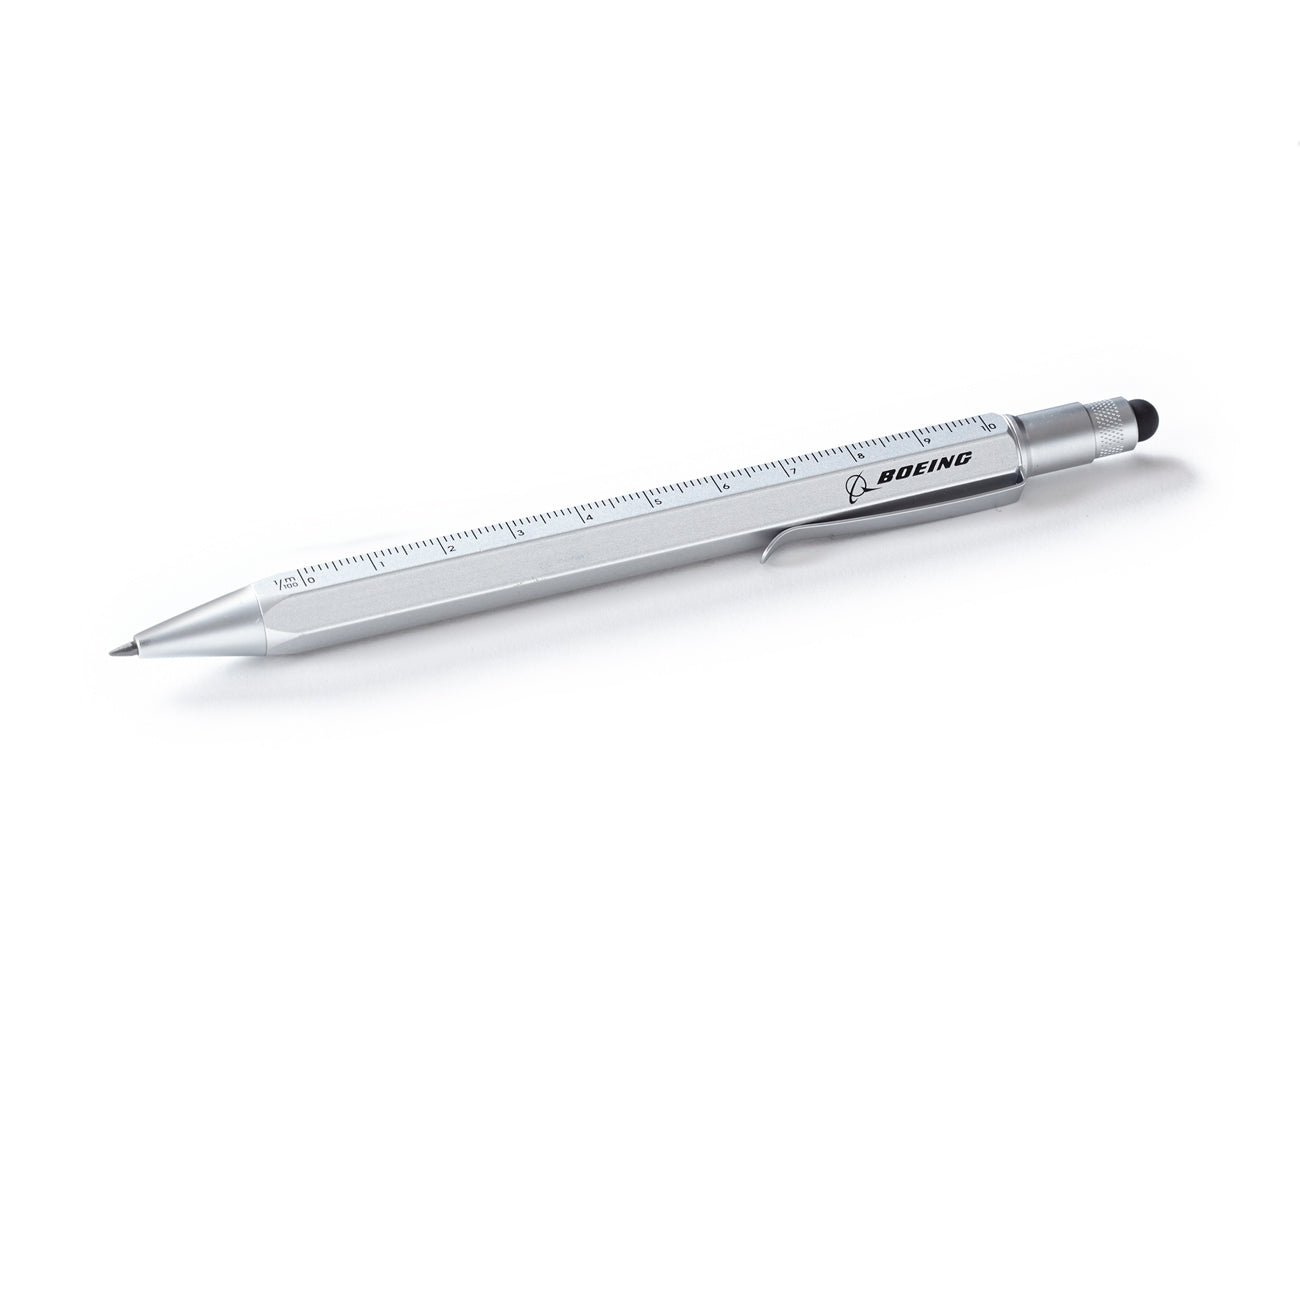 Stainless Steel Mechanical Pencil - Personalised